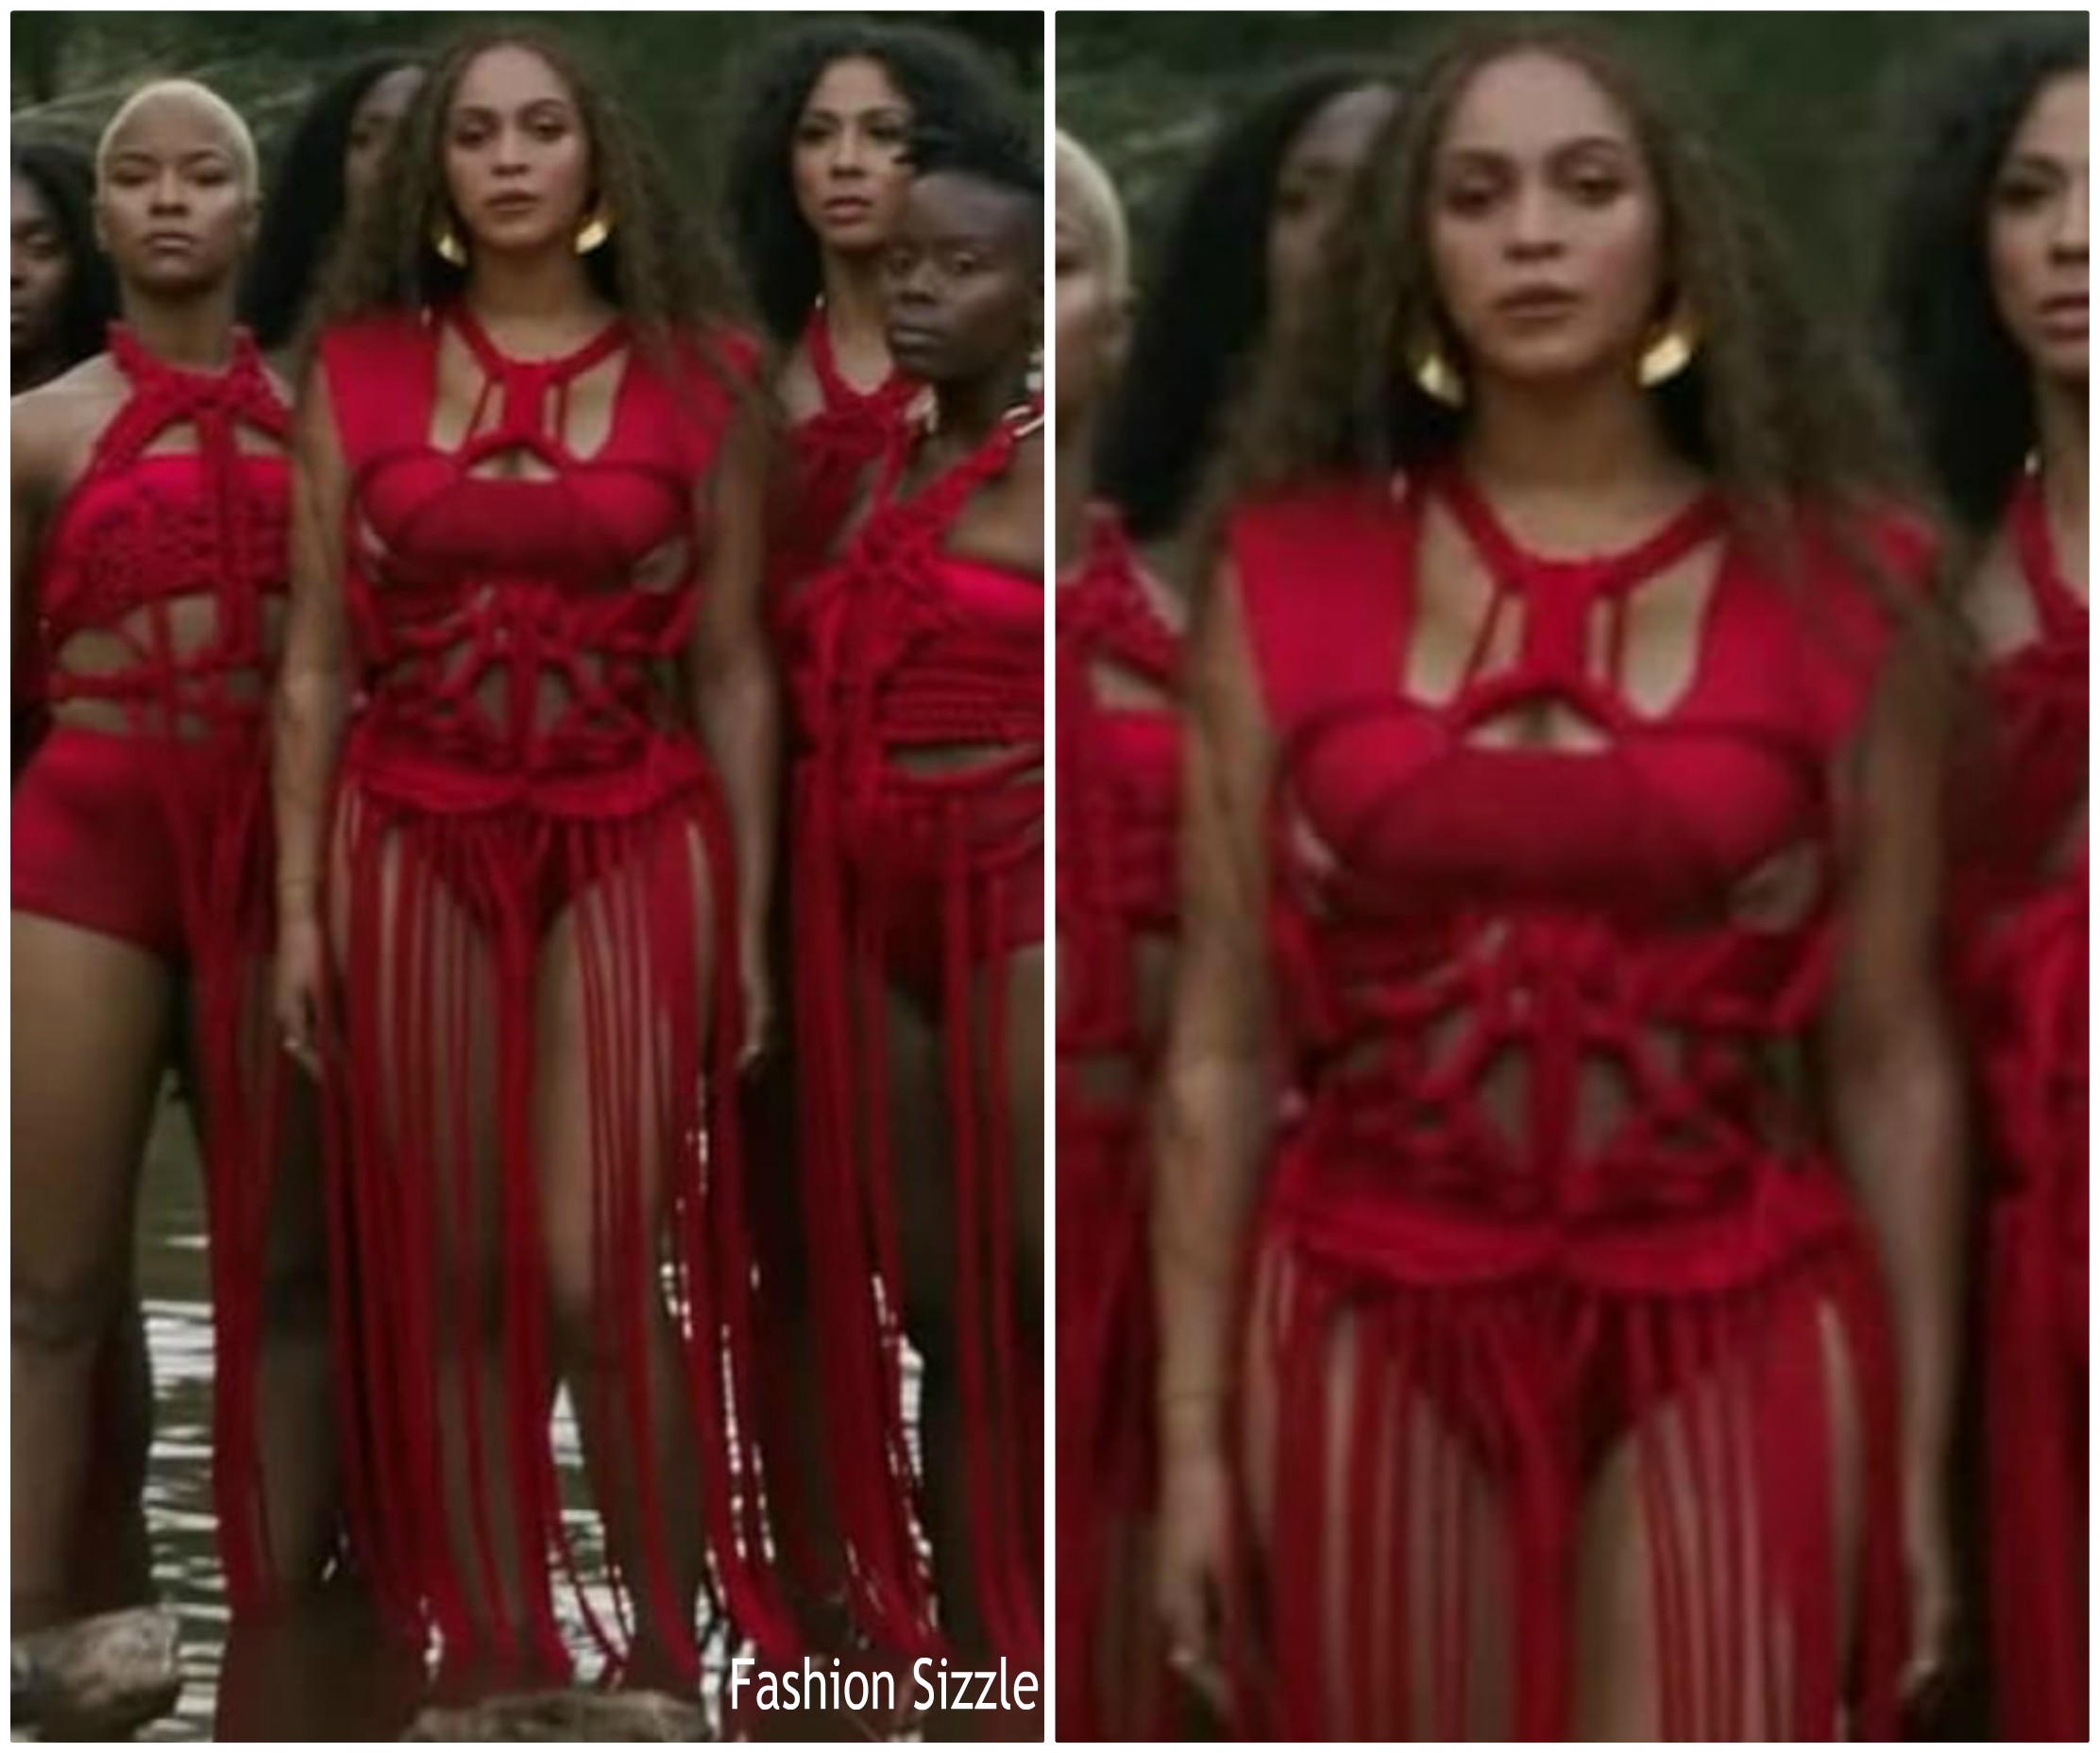 beyonce-knowles-in-deviant-la-vie-for-spirit-music-video